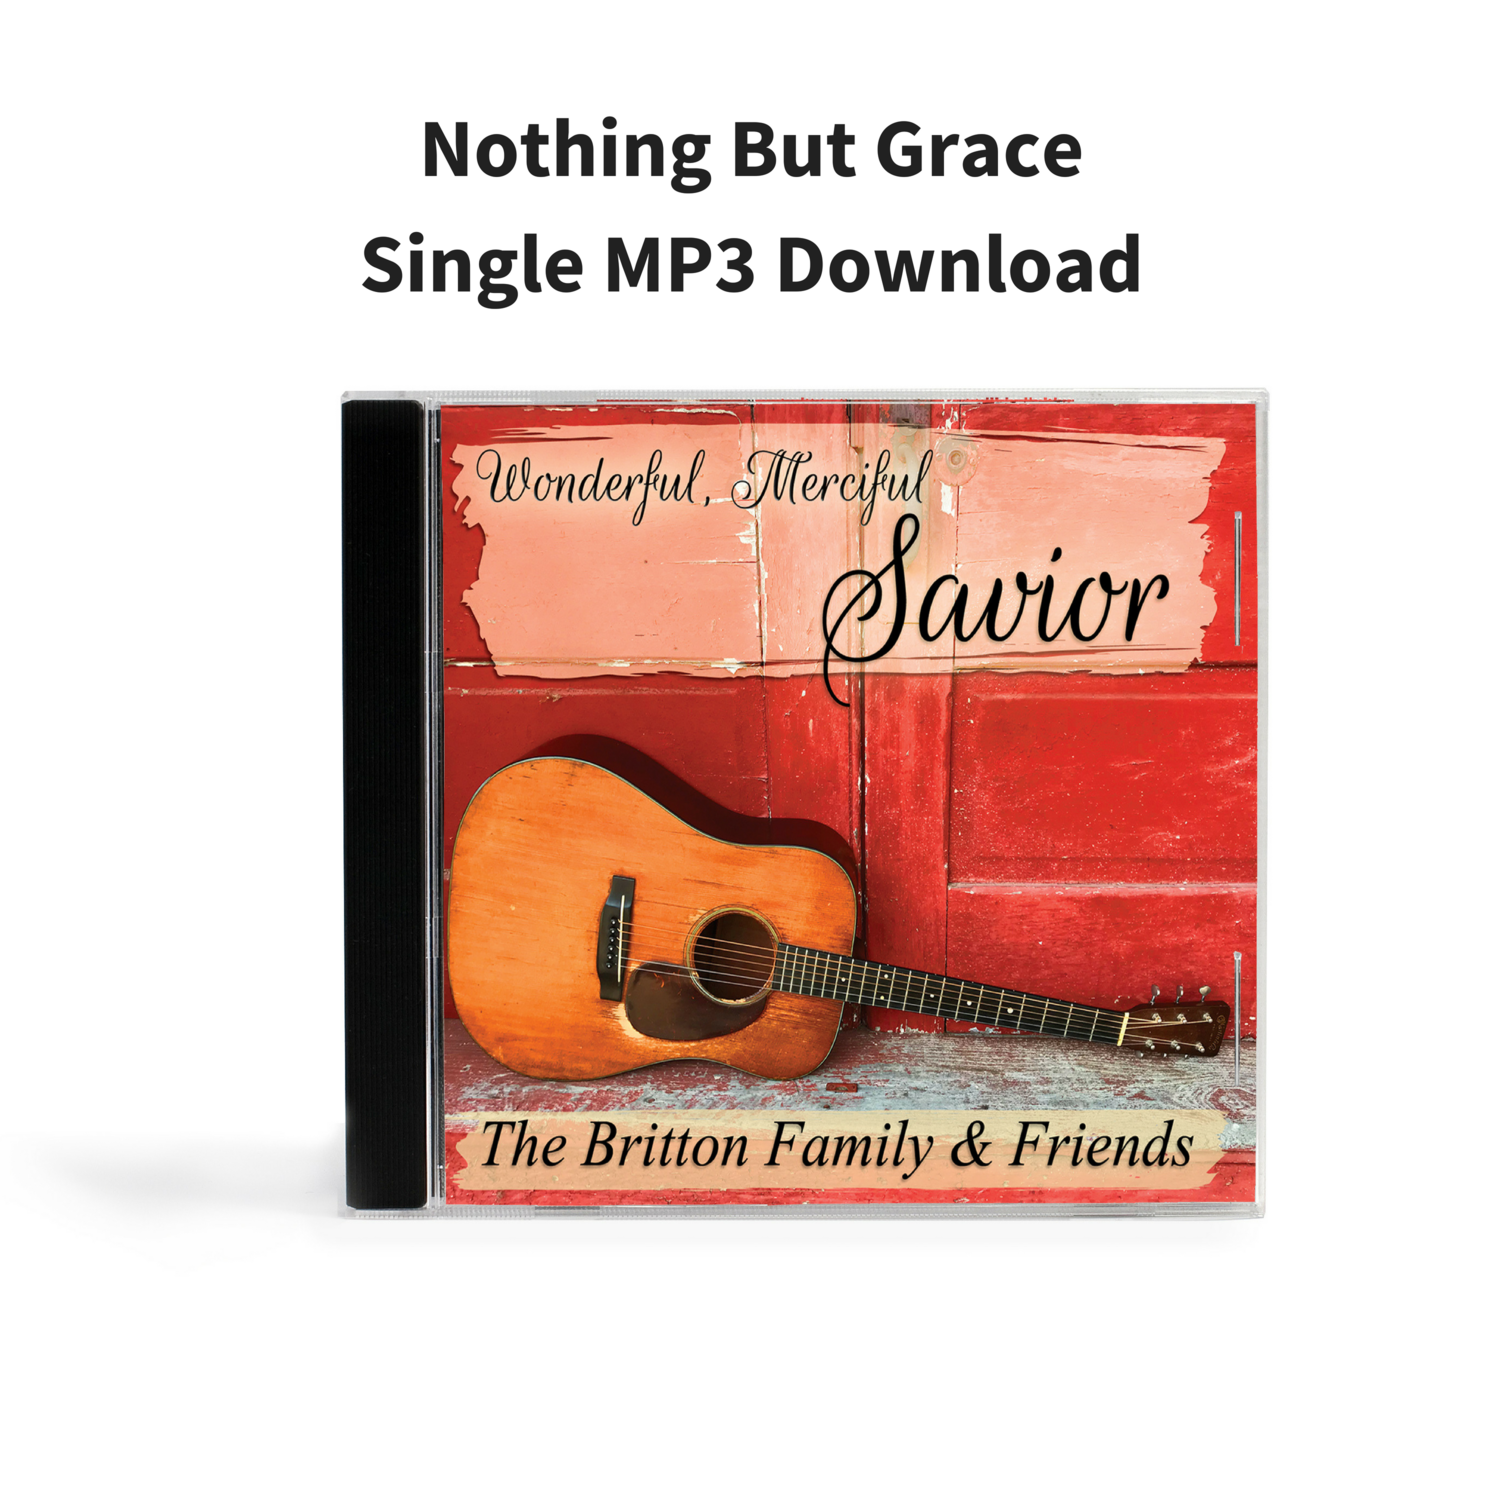 Nothing But Grace - Single MP3 Download